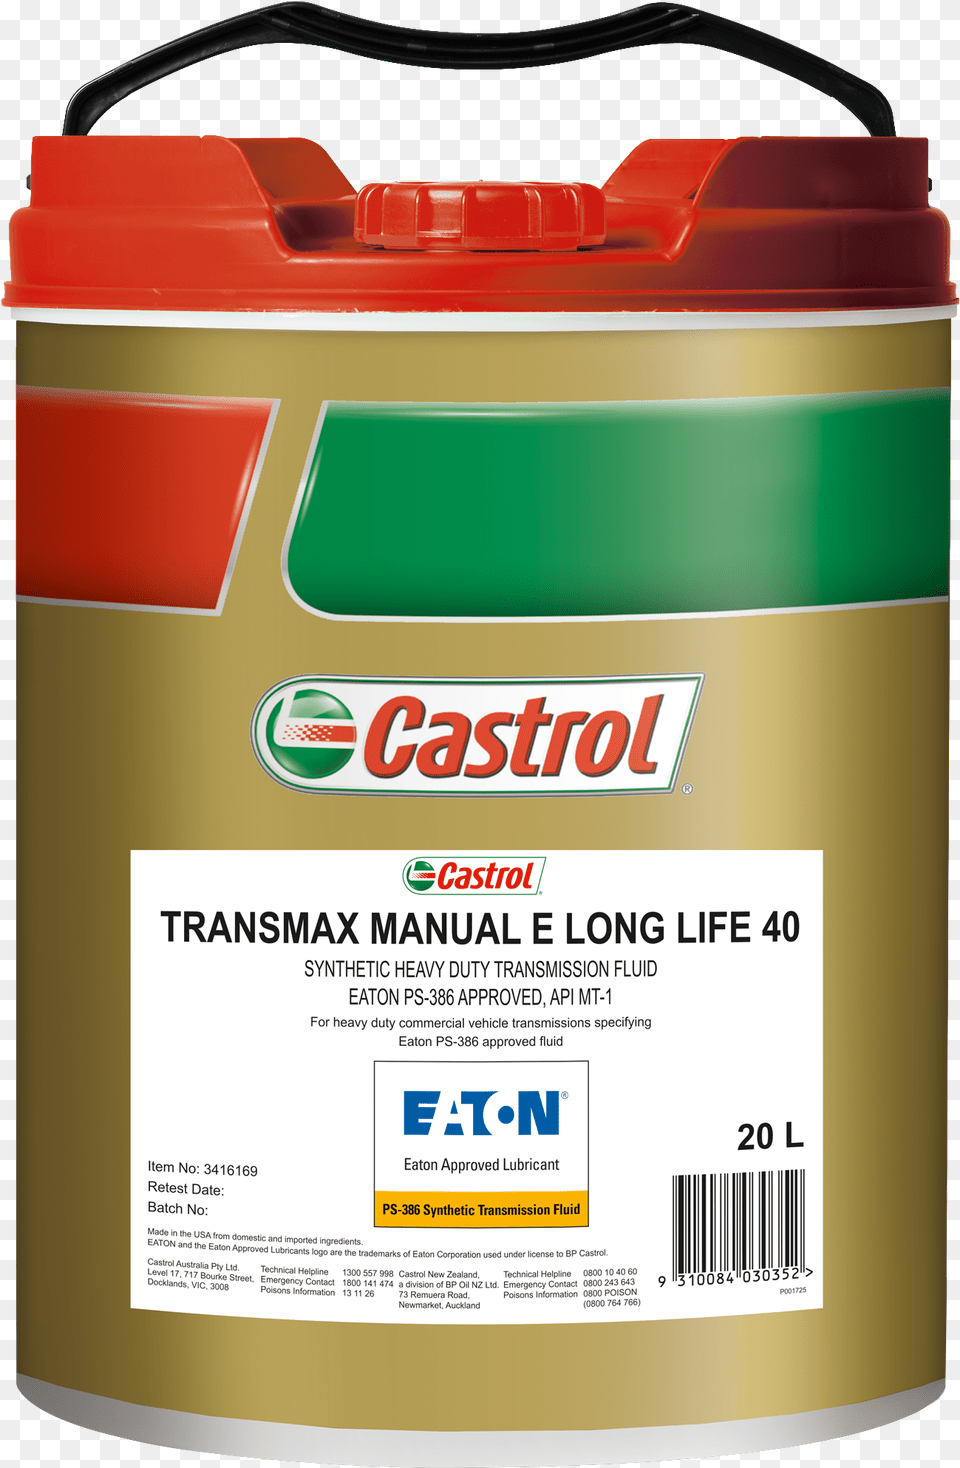 Castrol Bot 303, First Aid, Paint Container Png Image